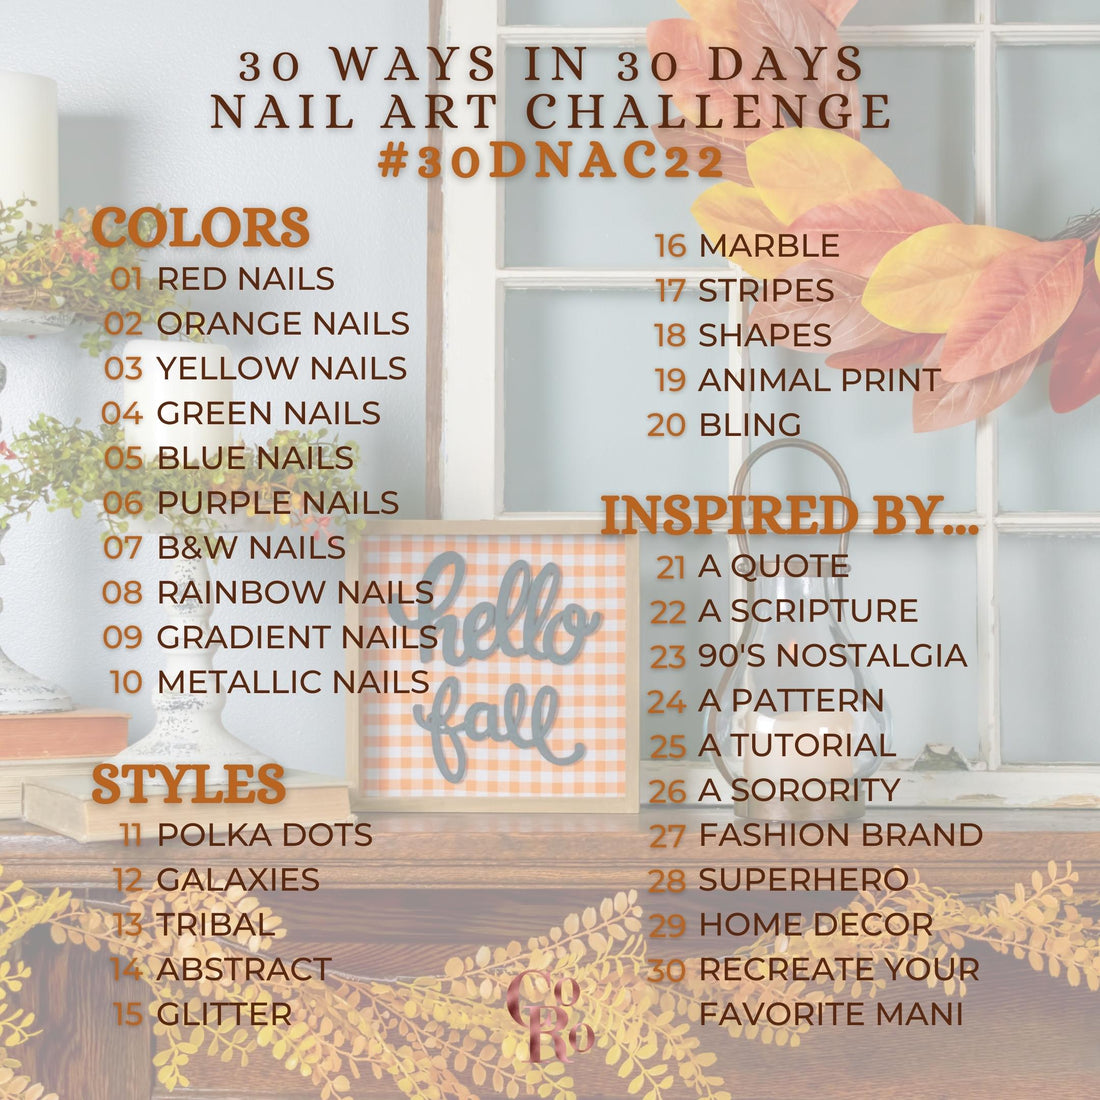 30 Day Nail Art Challenge, Let's Go!